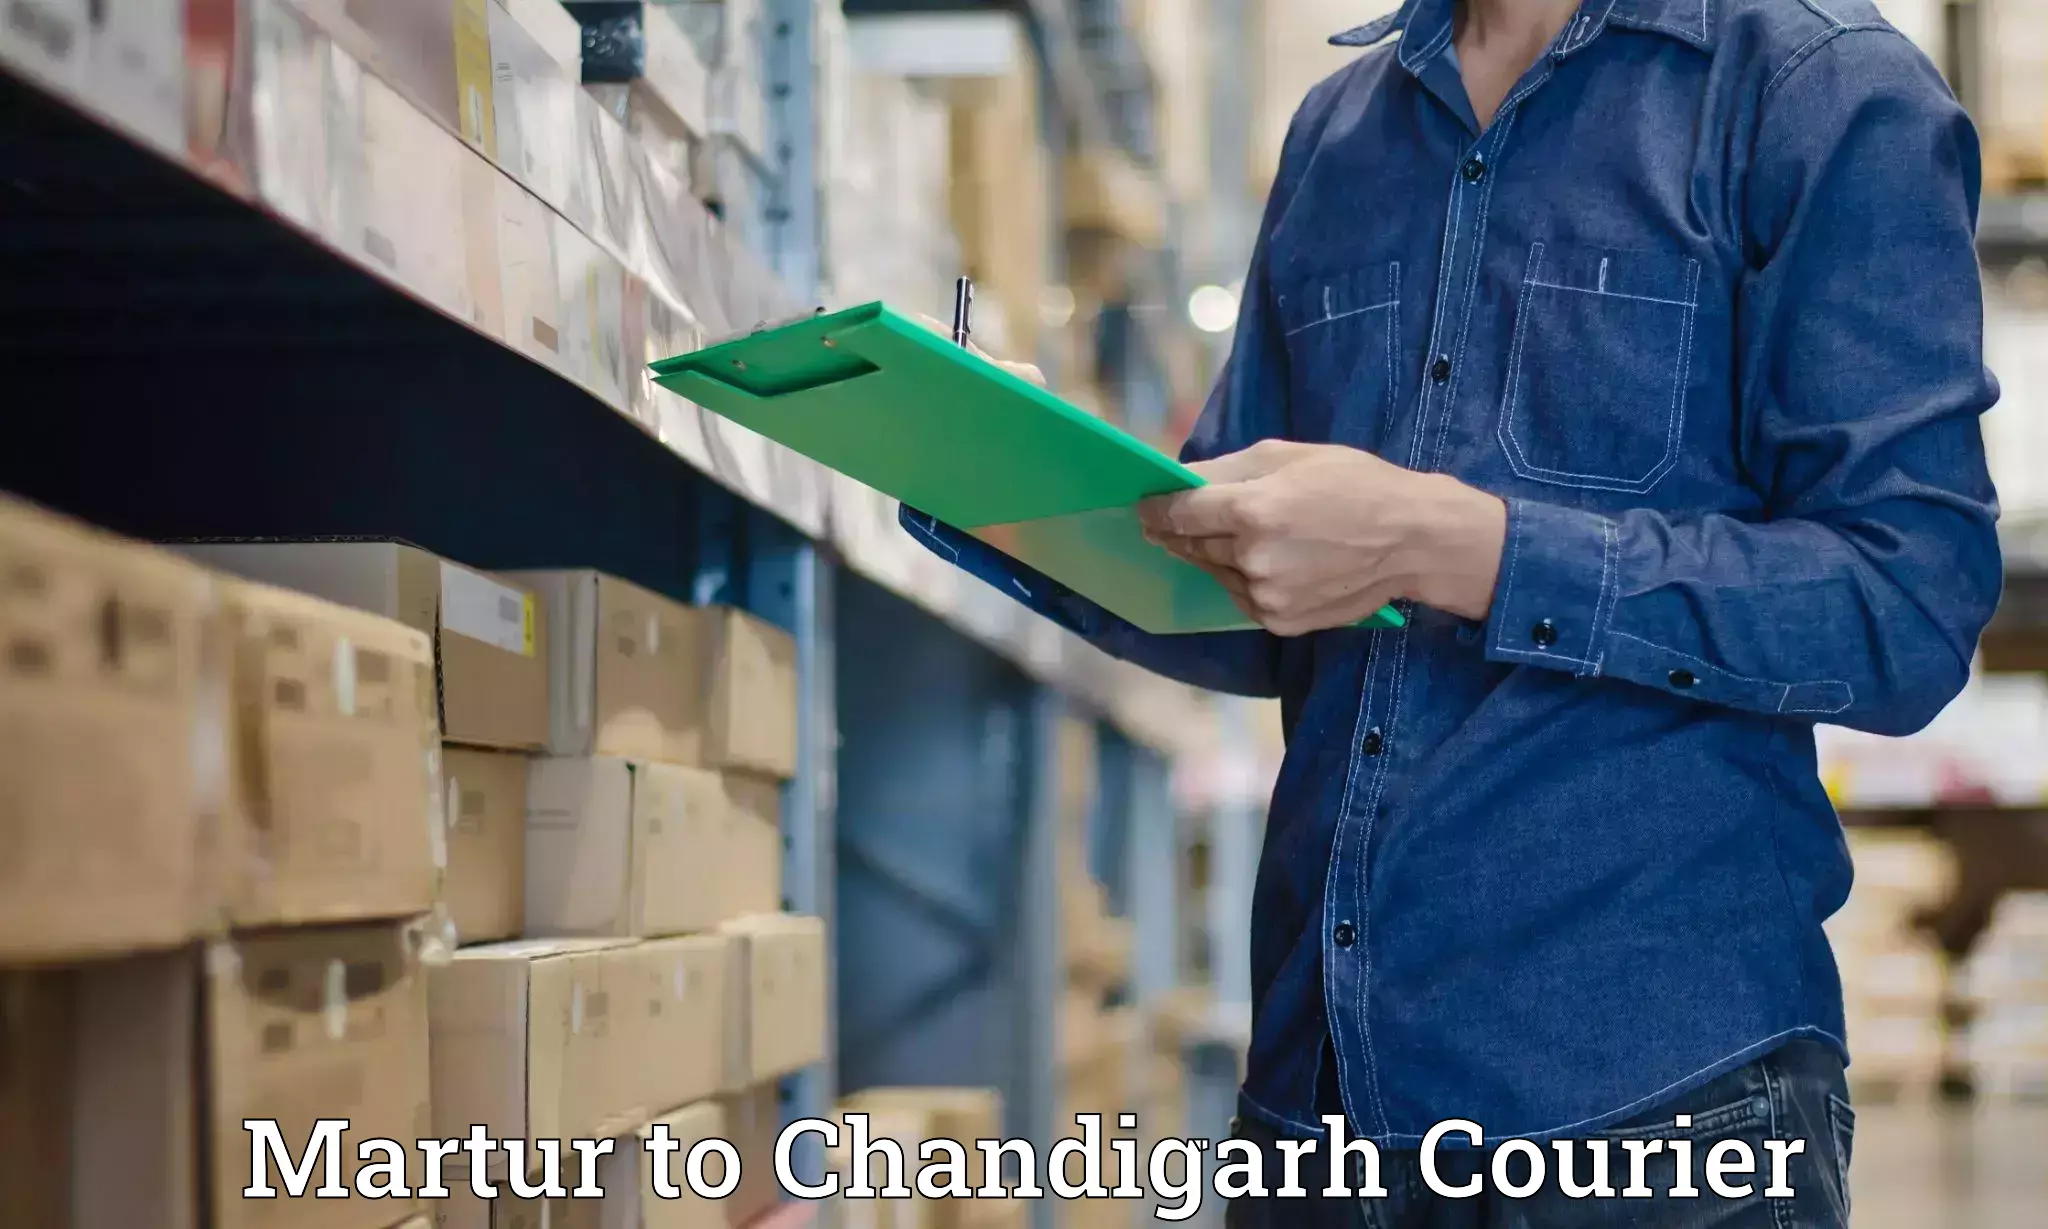 Customer-centric shipping Martur to Chandigarh